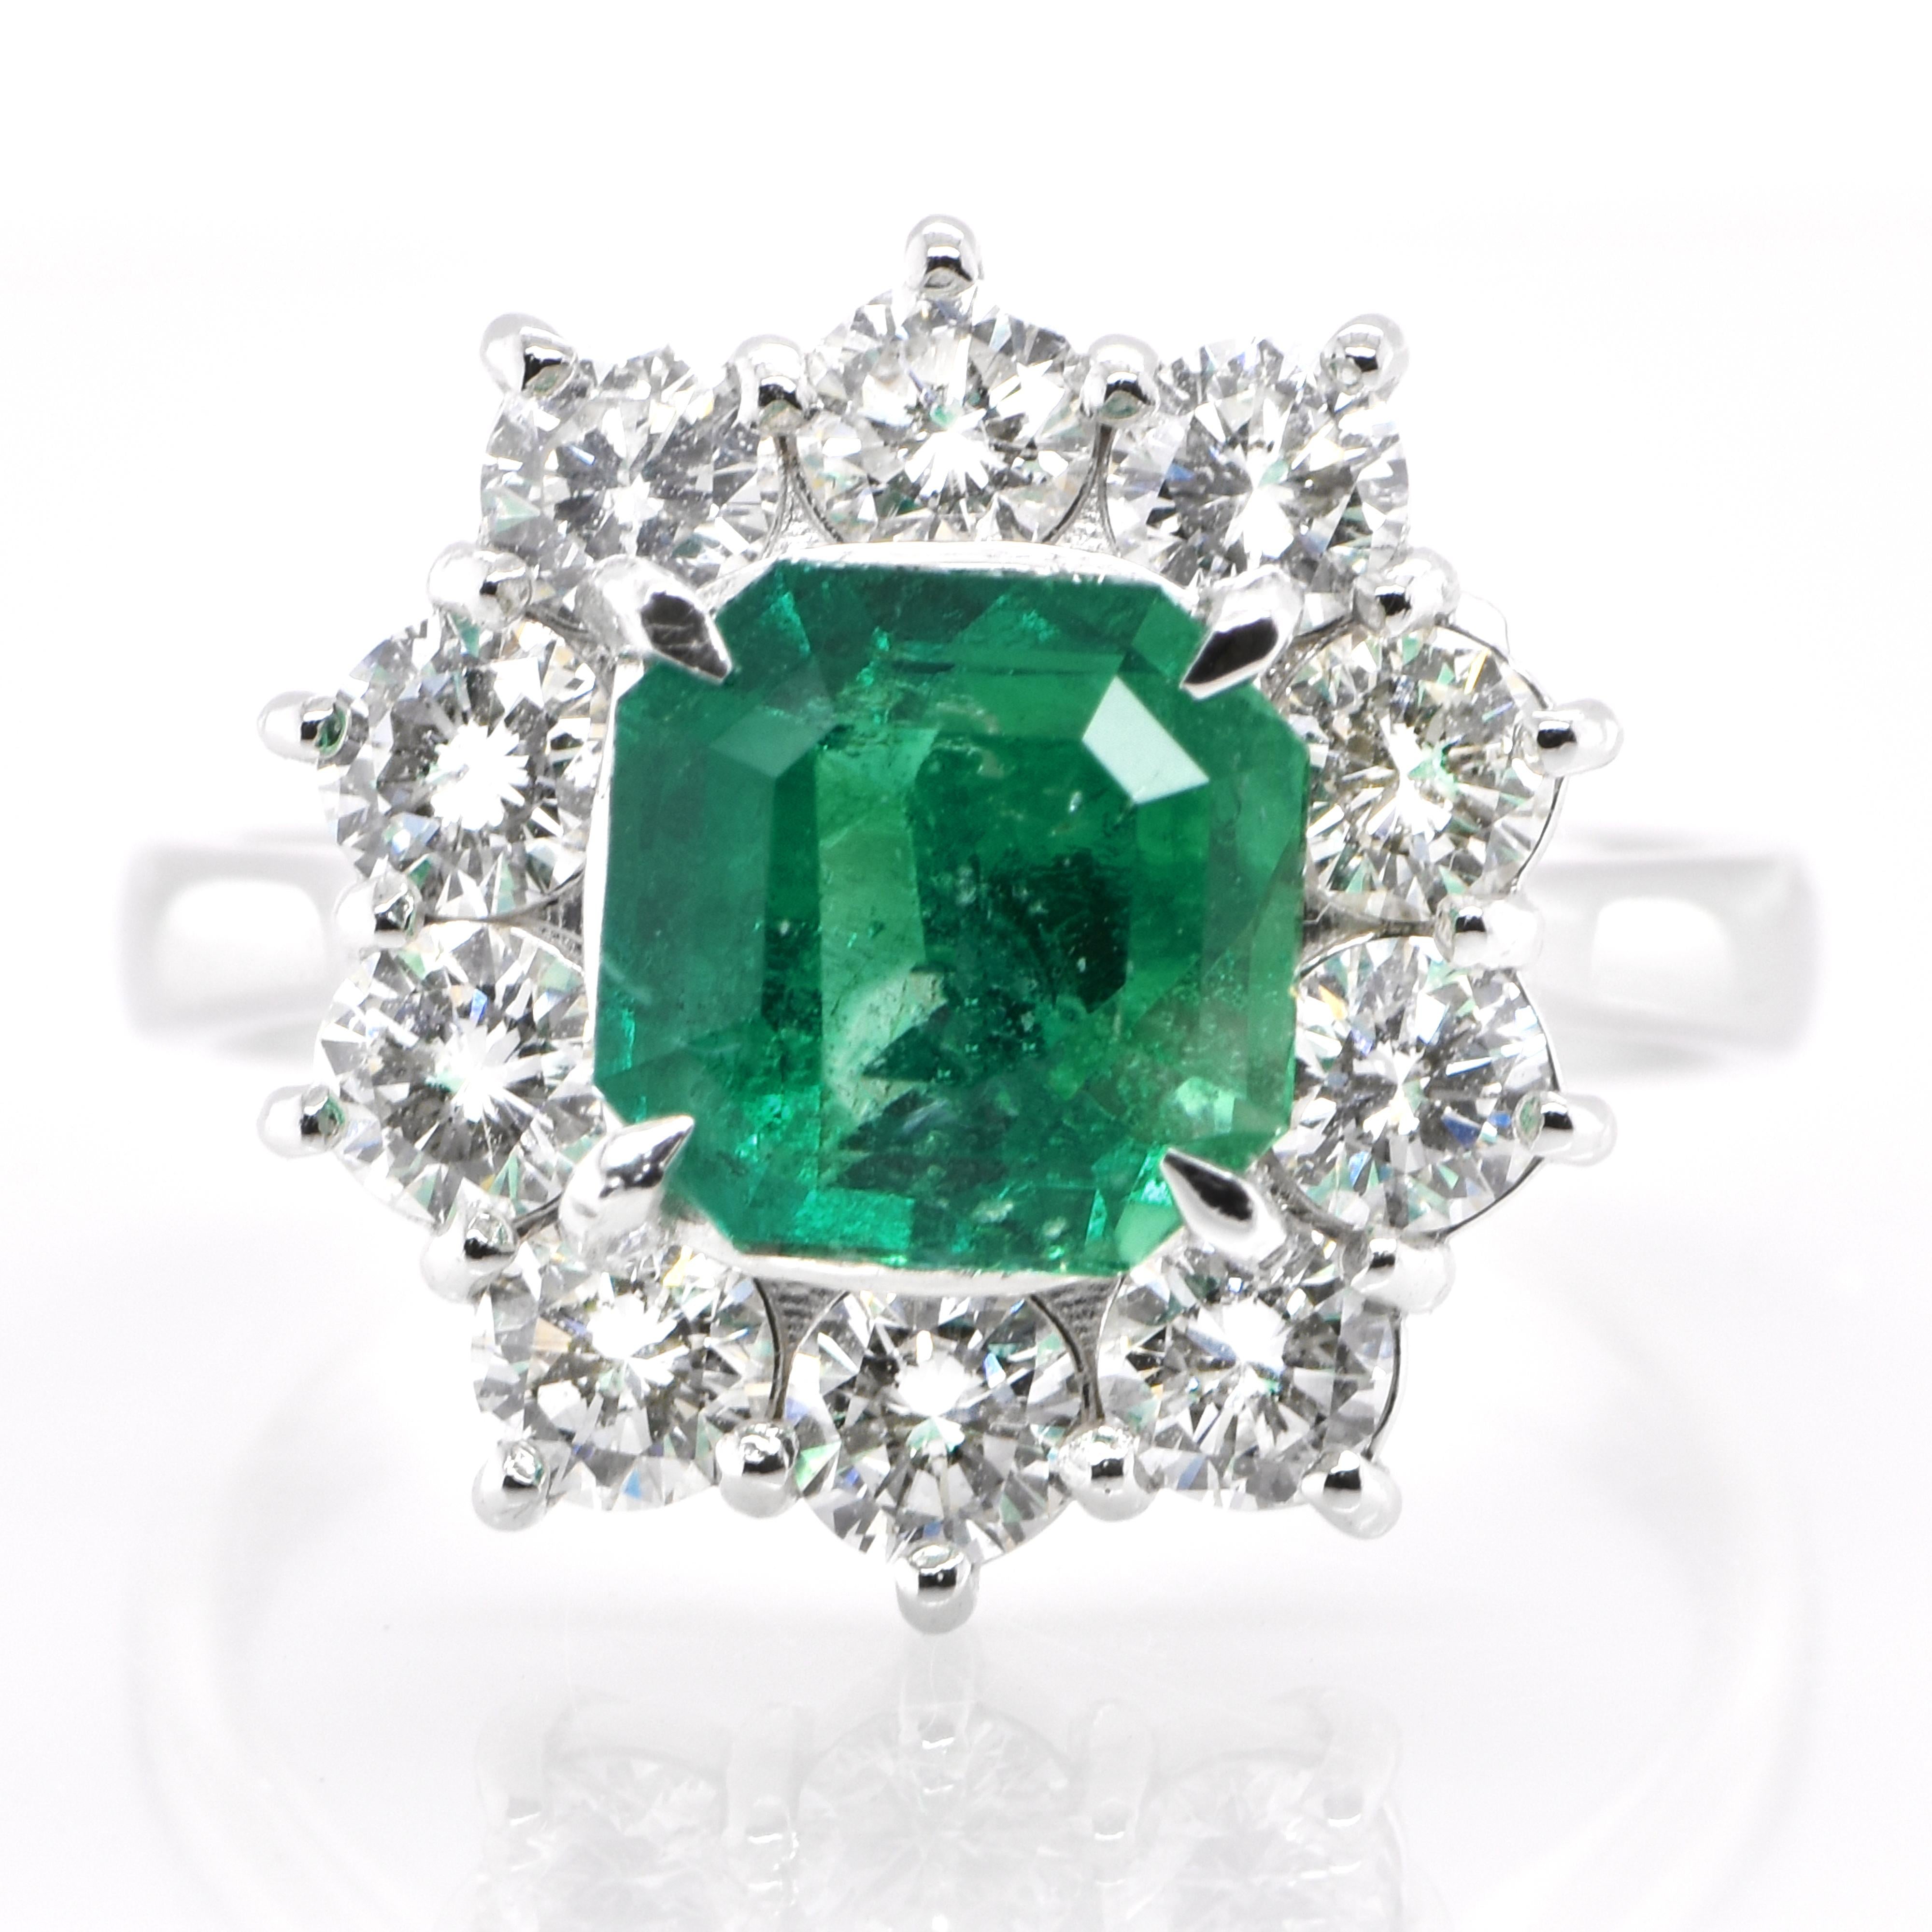 A stunning ring featuring a GIA Certified 2.22 Carat Natural Colombian Emerald and 1.32 Carats of Diamond Accents set in Platinum and 18 Karat Yellow Gold. People have admired emerald’s green for thousands of years. Emeralds have always been